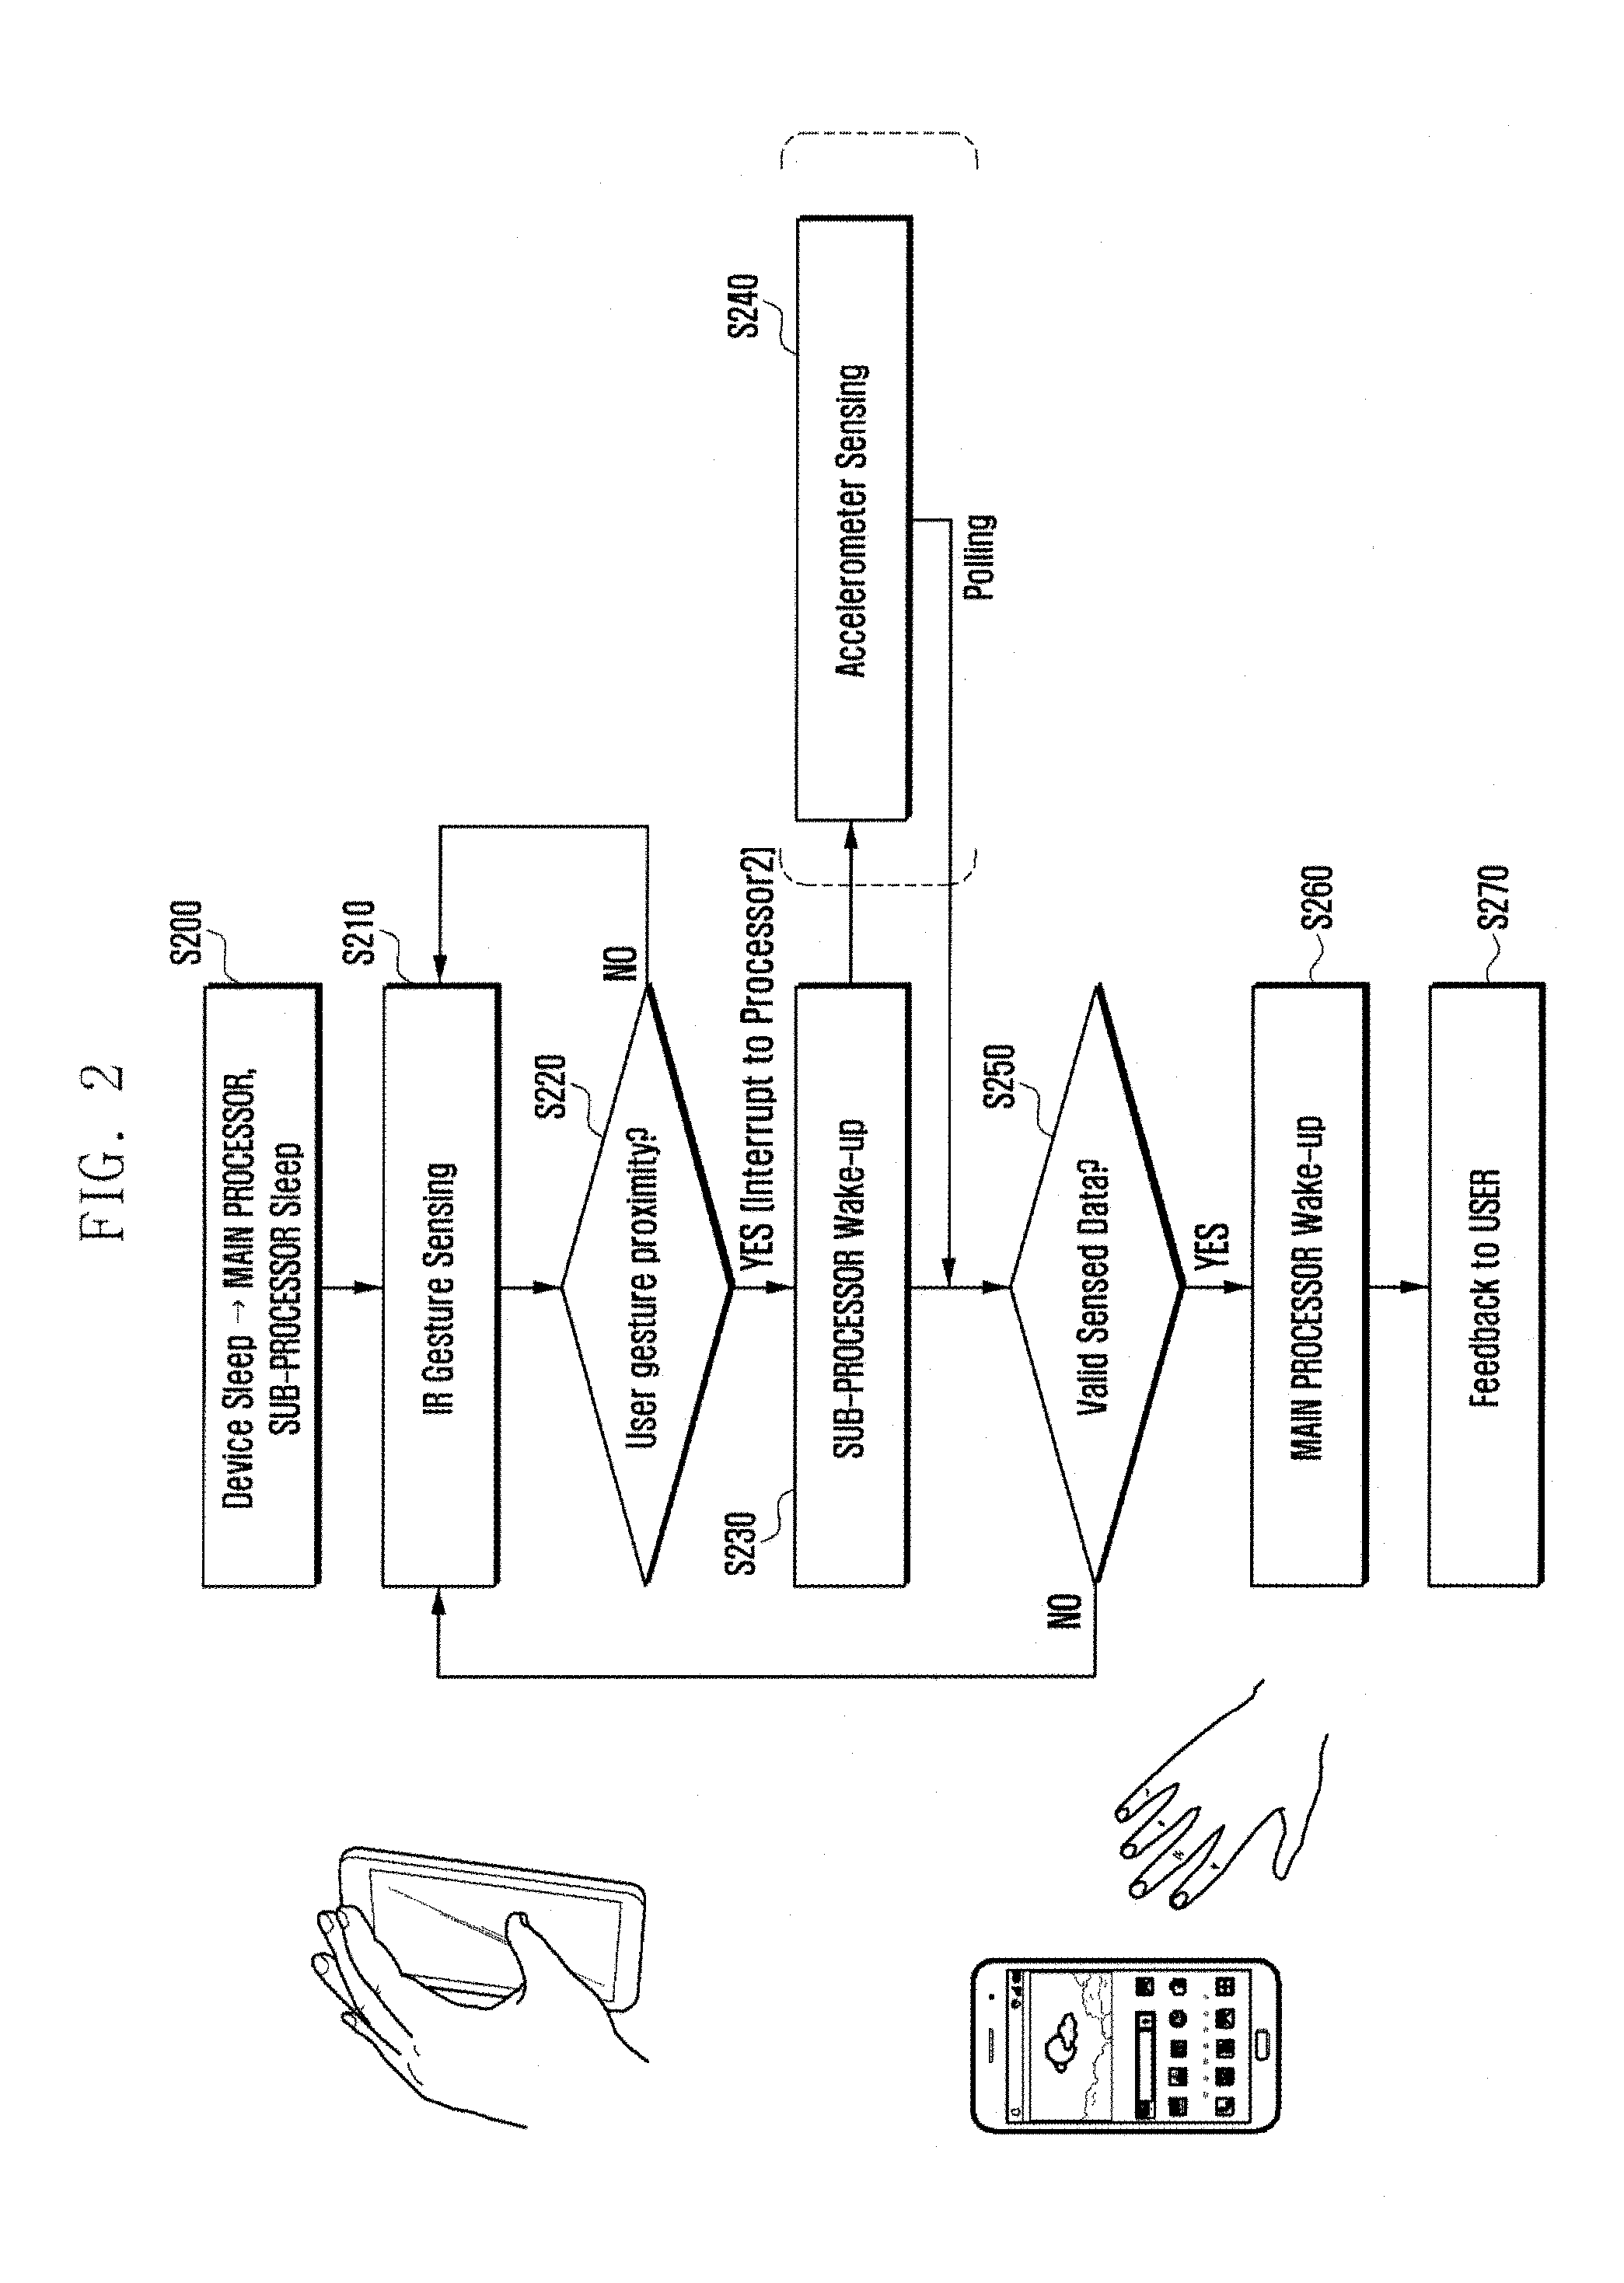 Ultra low power apparatus and method to wake up a main processor